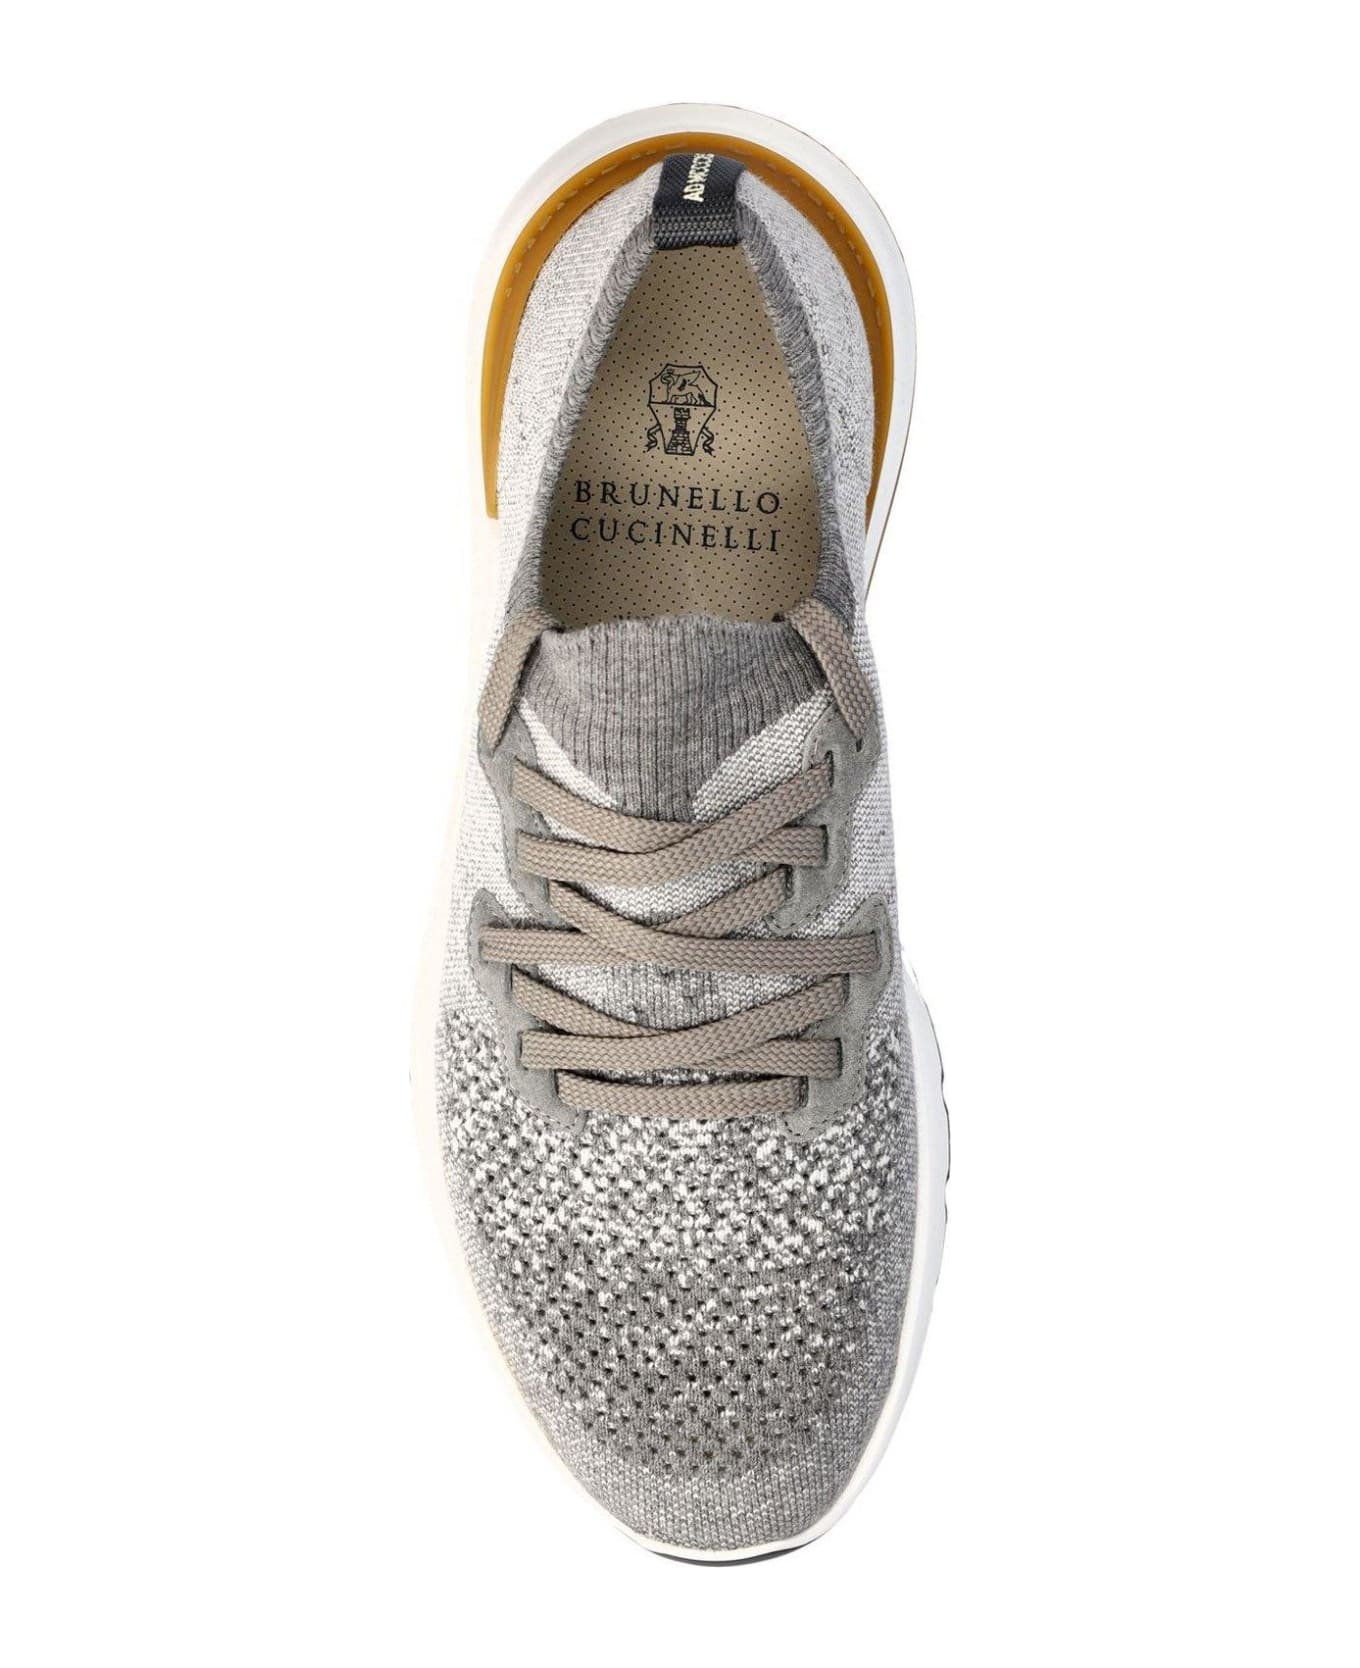 Brunello Cucinelli Lace Up Sock Sneakers - GREY